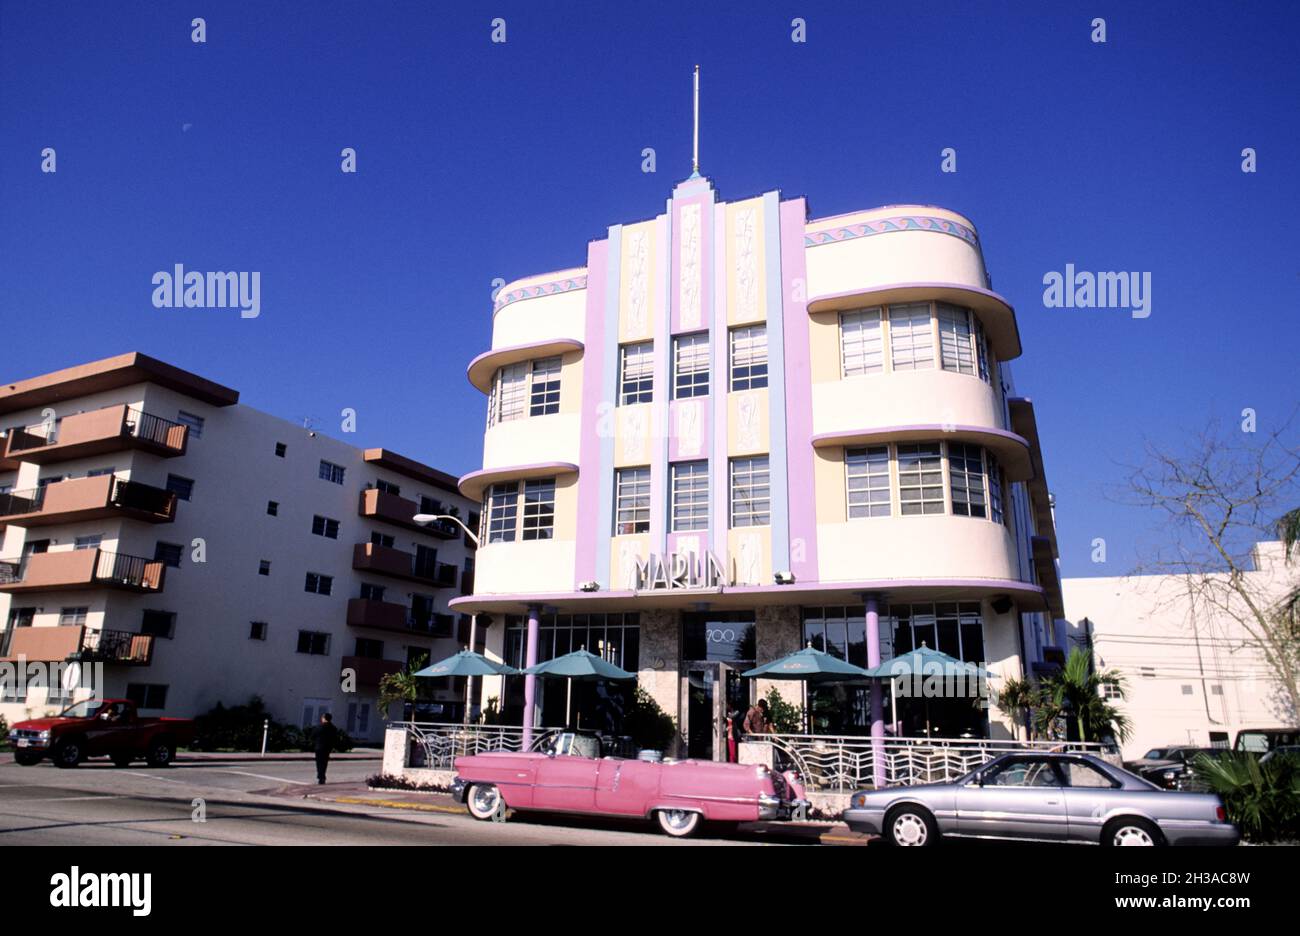 UNITED STATES, FLORIDA, MIAMI BEACH, PINK CADILLAC IN FRONT OF MARLIN HOTEL IN THE ART DECO DISTRICT Stock Photo